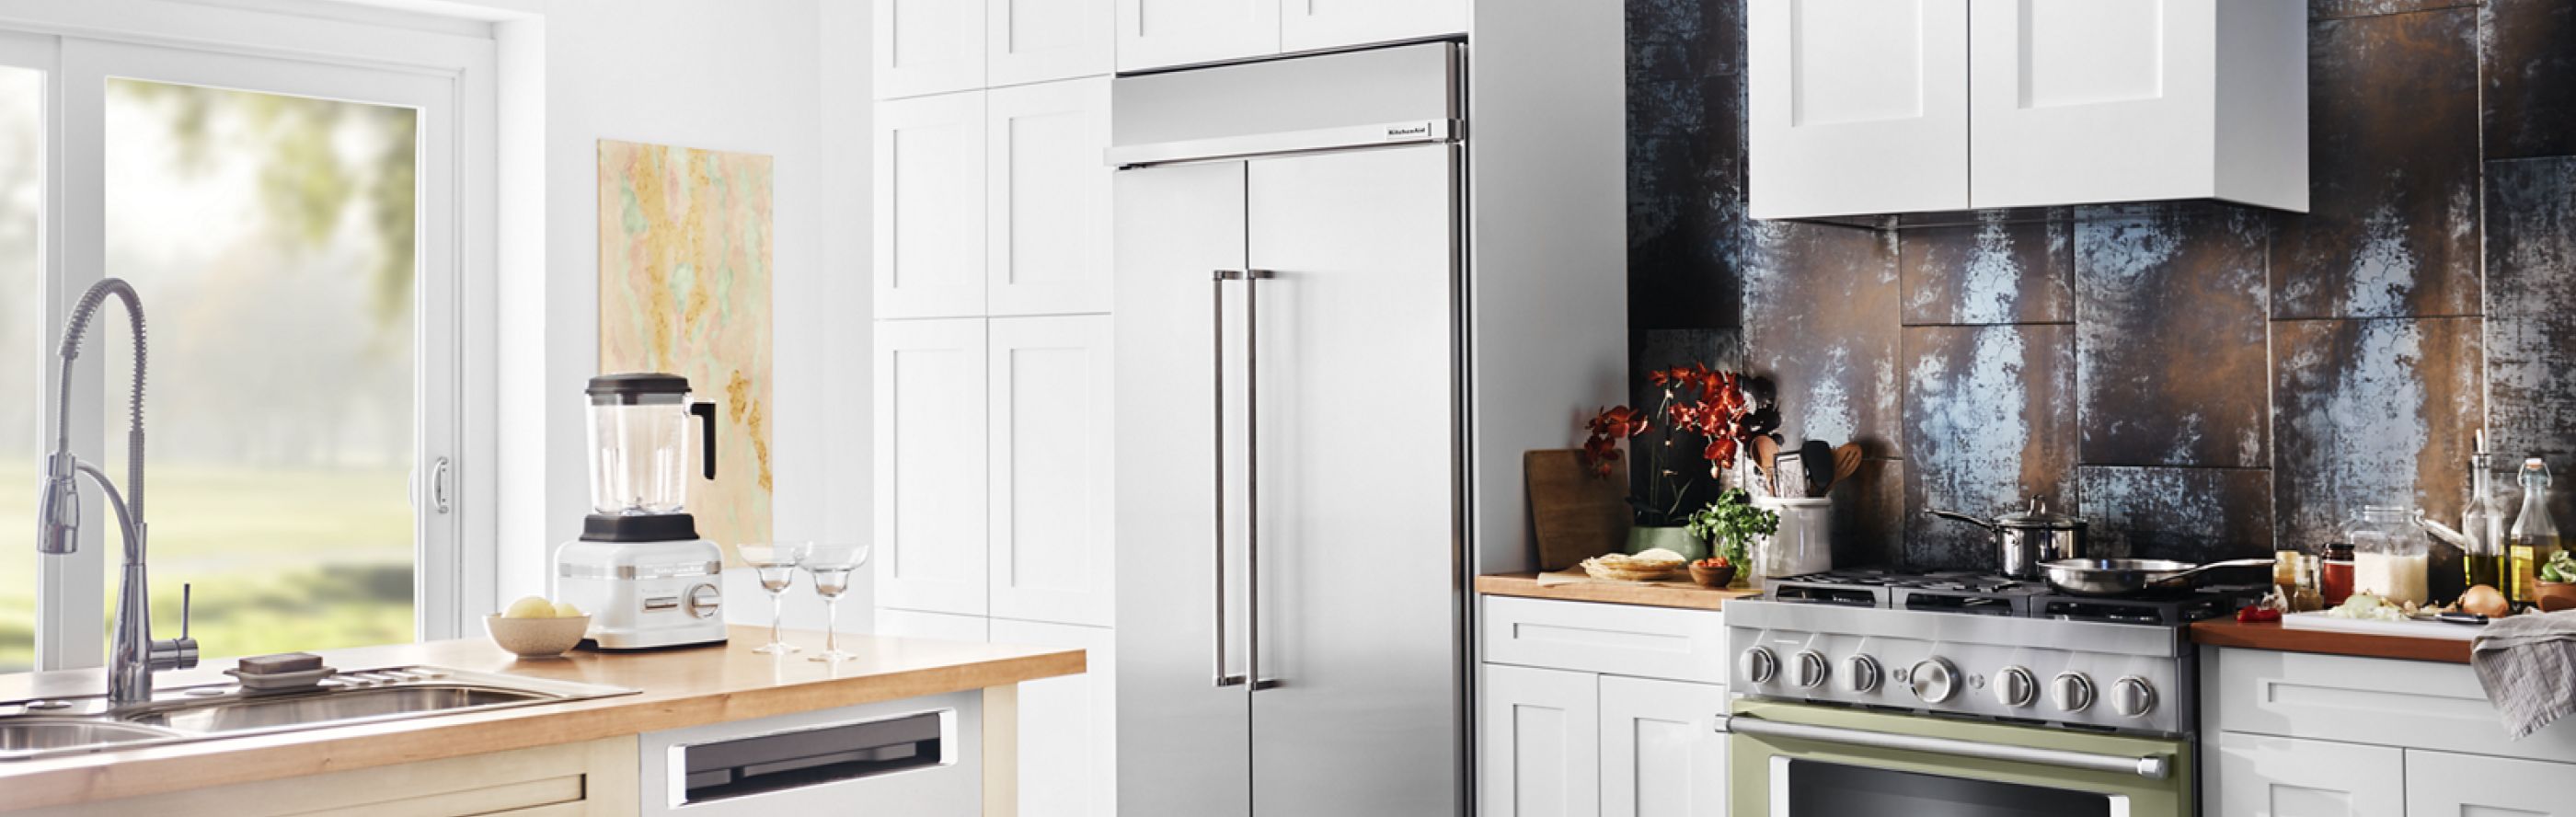 Built-in stainless steel KitchenAid® refrigerator in white cabinetry